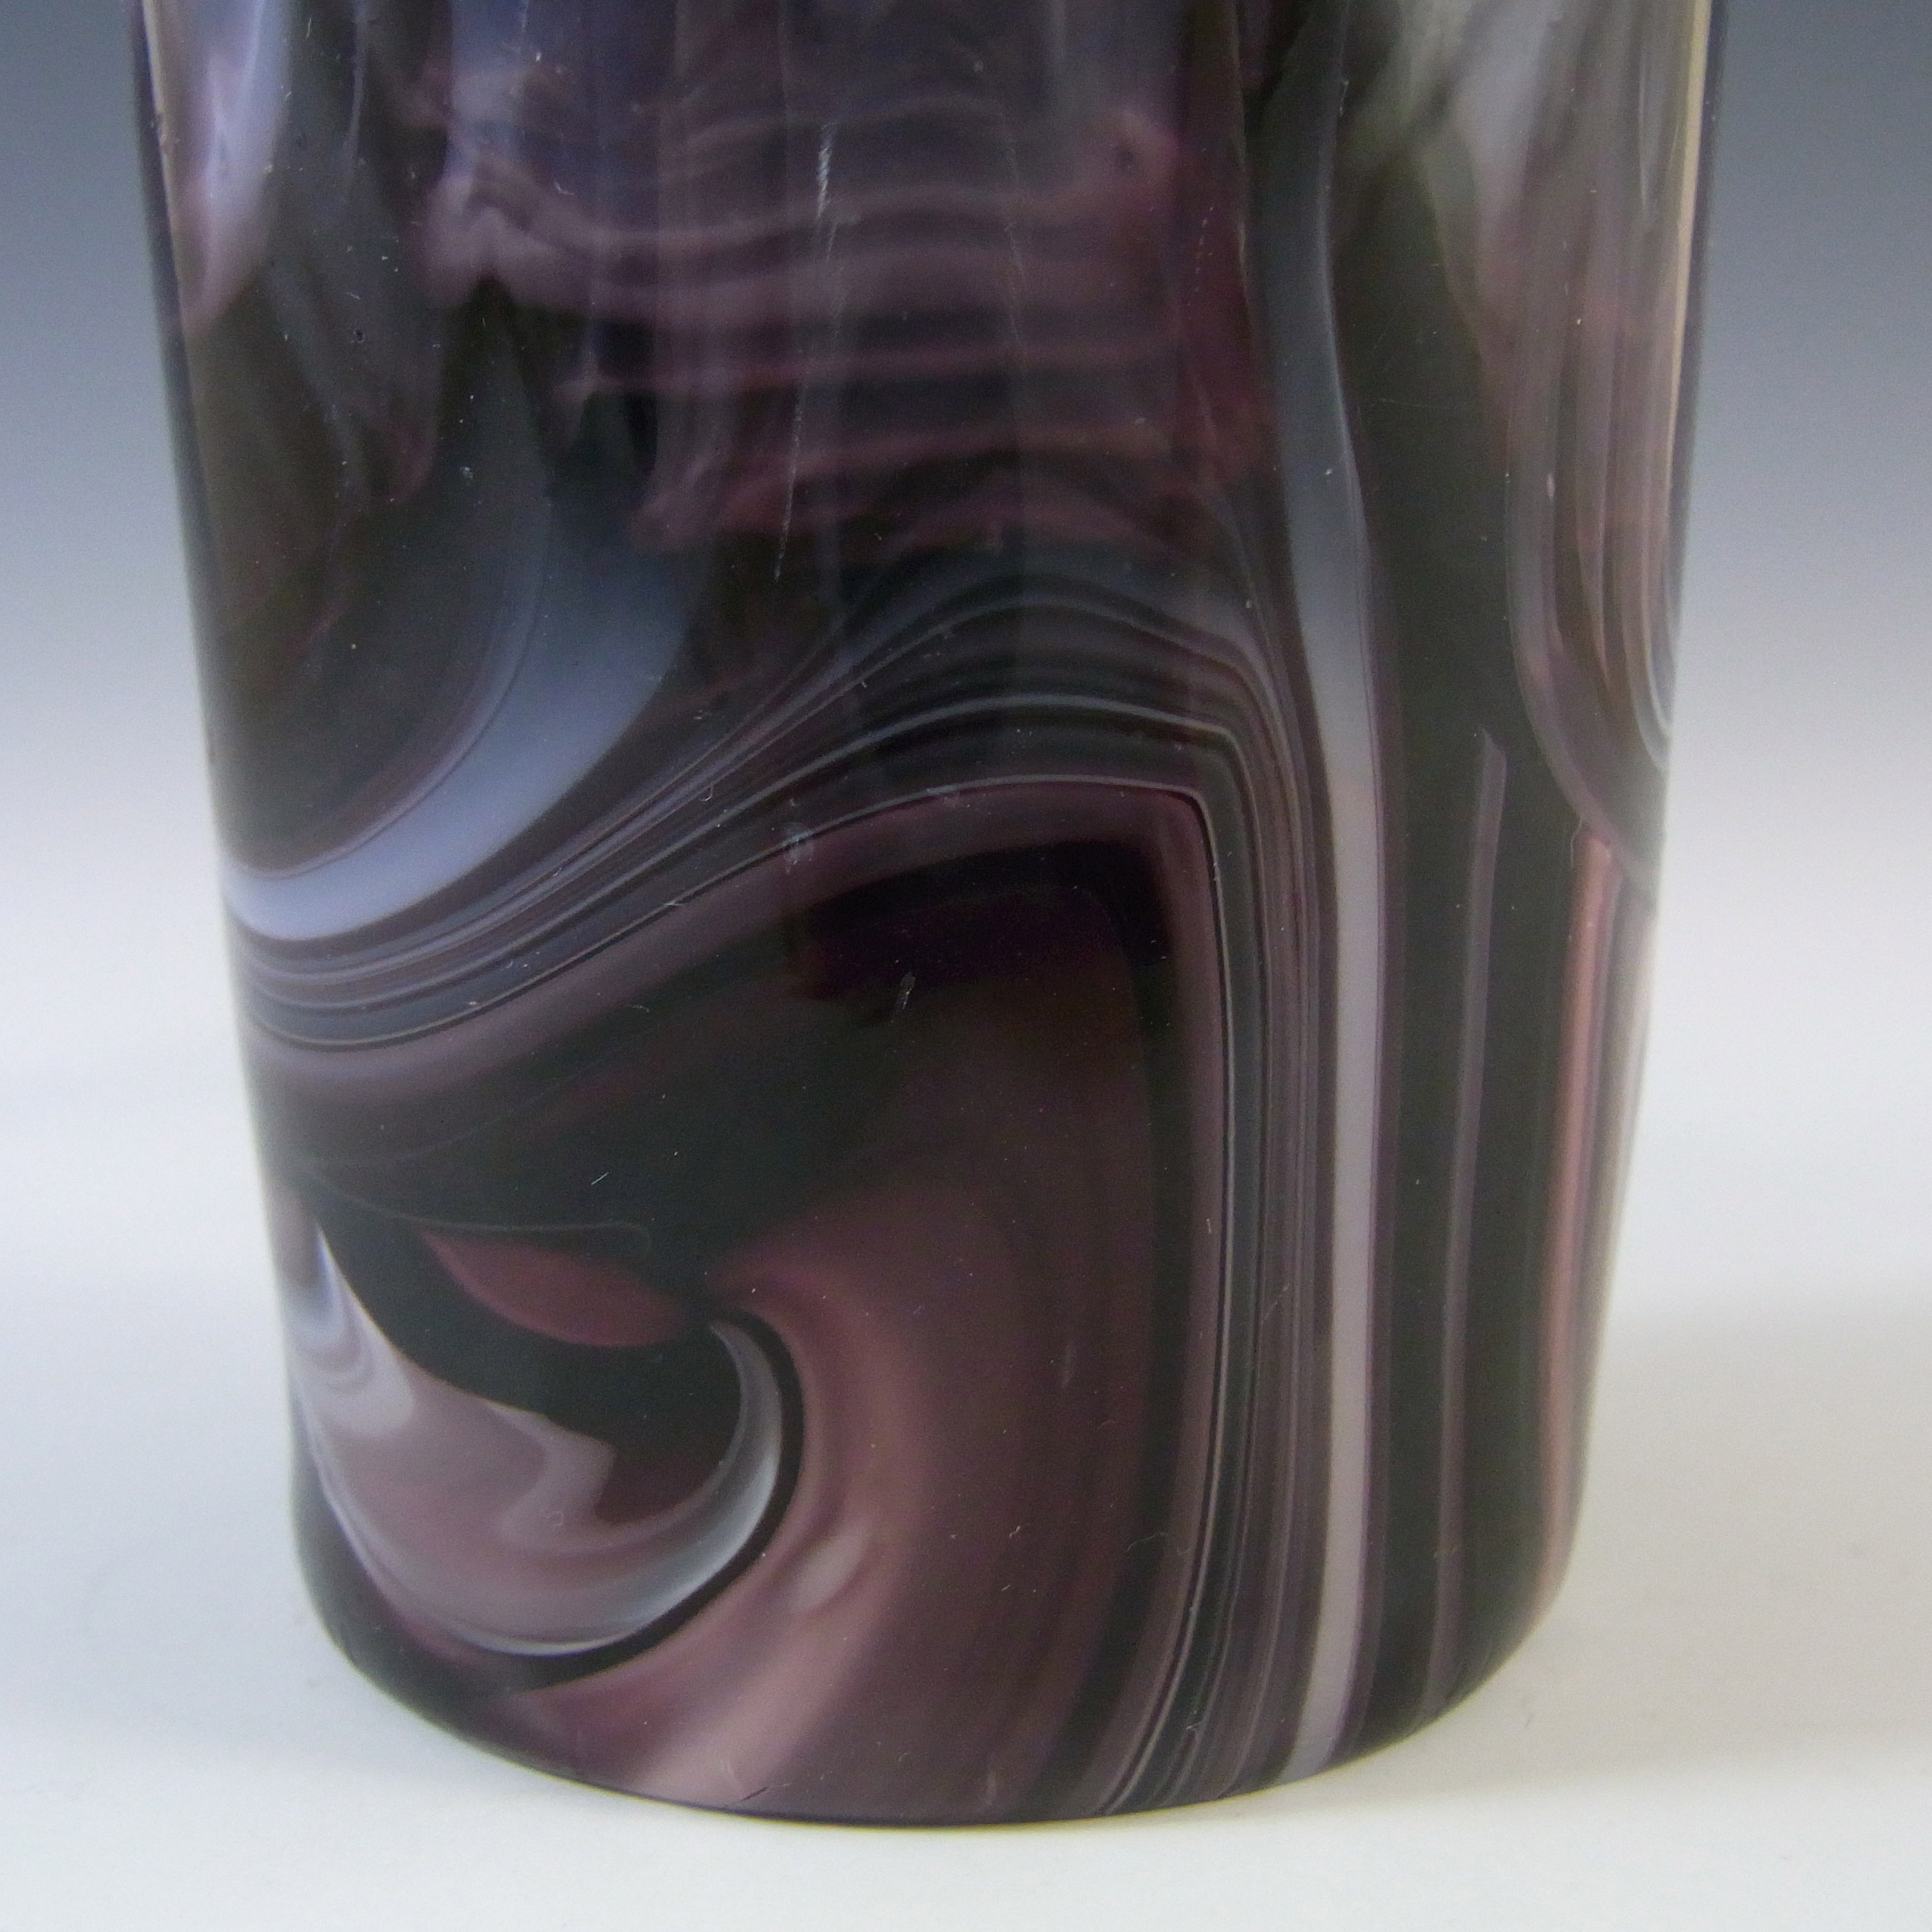 Sowerby MARKED Victorian Purple Malachite/Slag Glass Tumbler - Click Image to Close